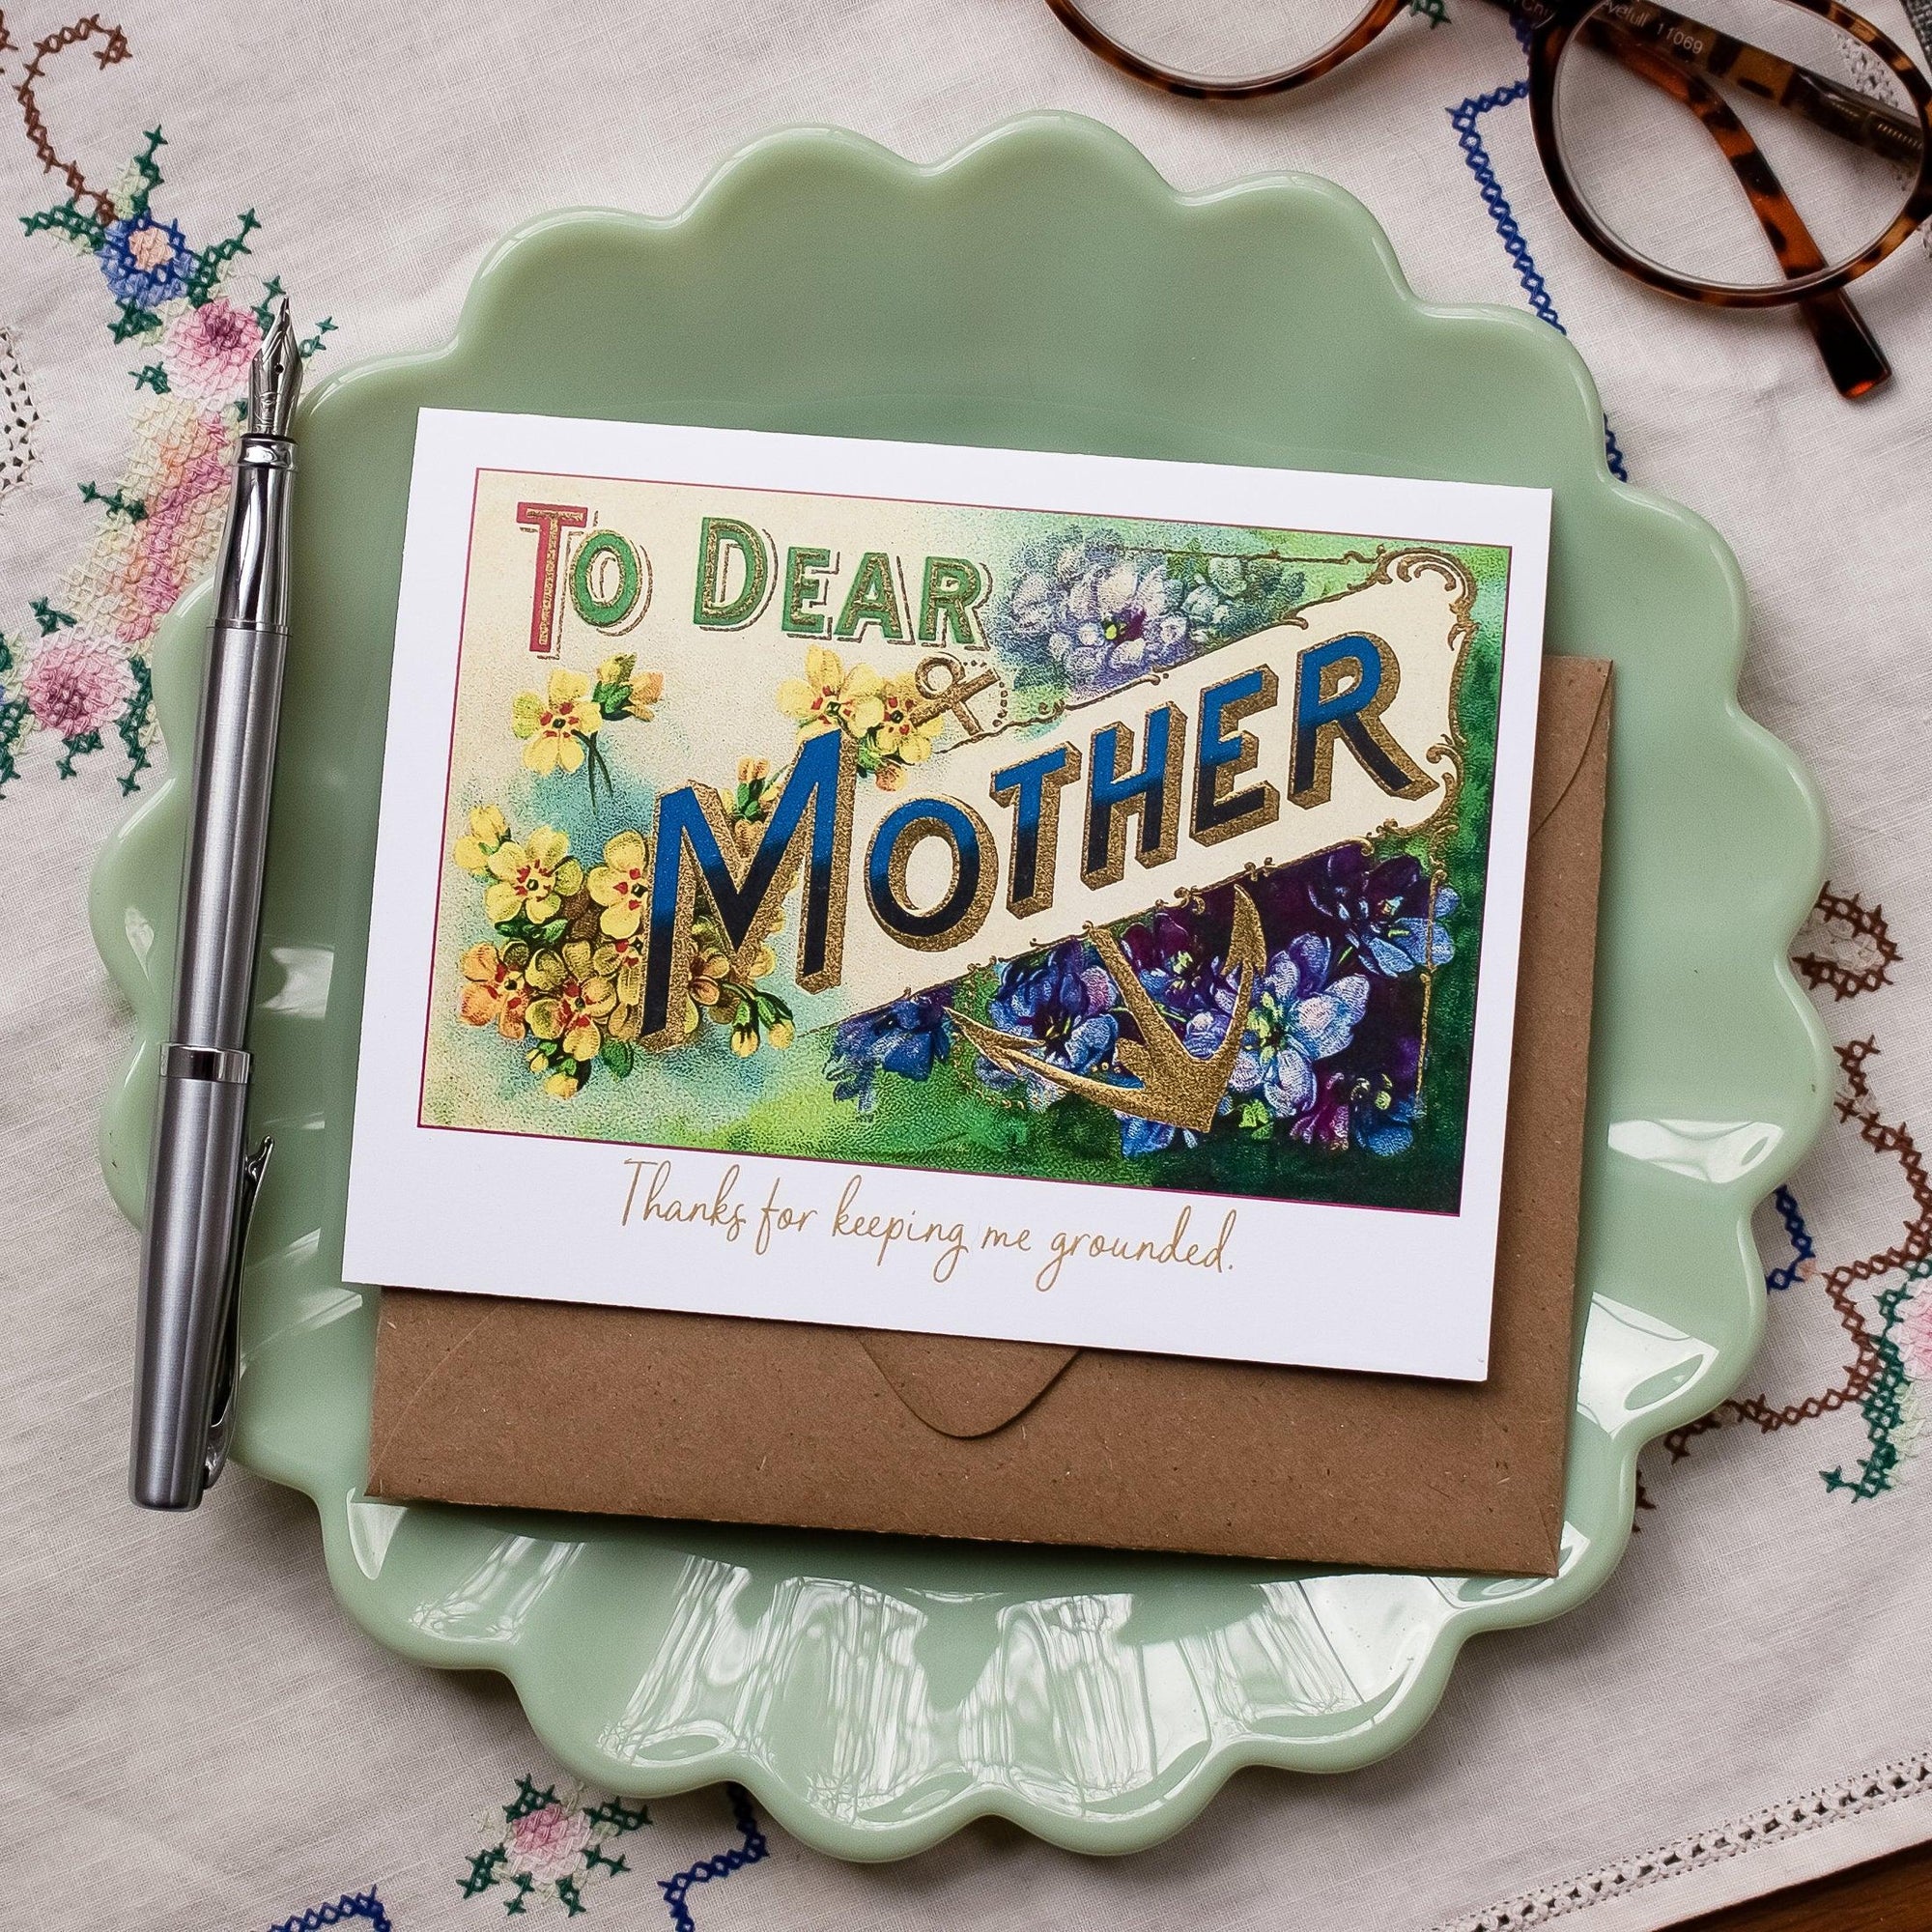 Mother's Day Card - To Dear Mother - Vintage Floral and Anchor Mothers Day Card - Thanks for Keeping Me Grounded Mom Card for Mother's Day